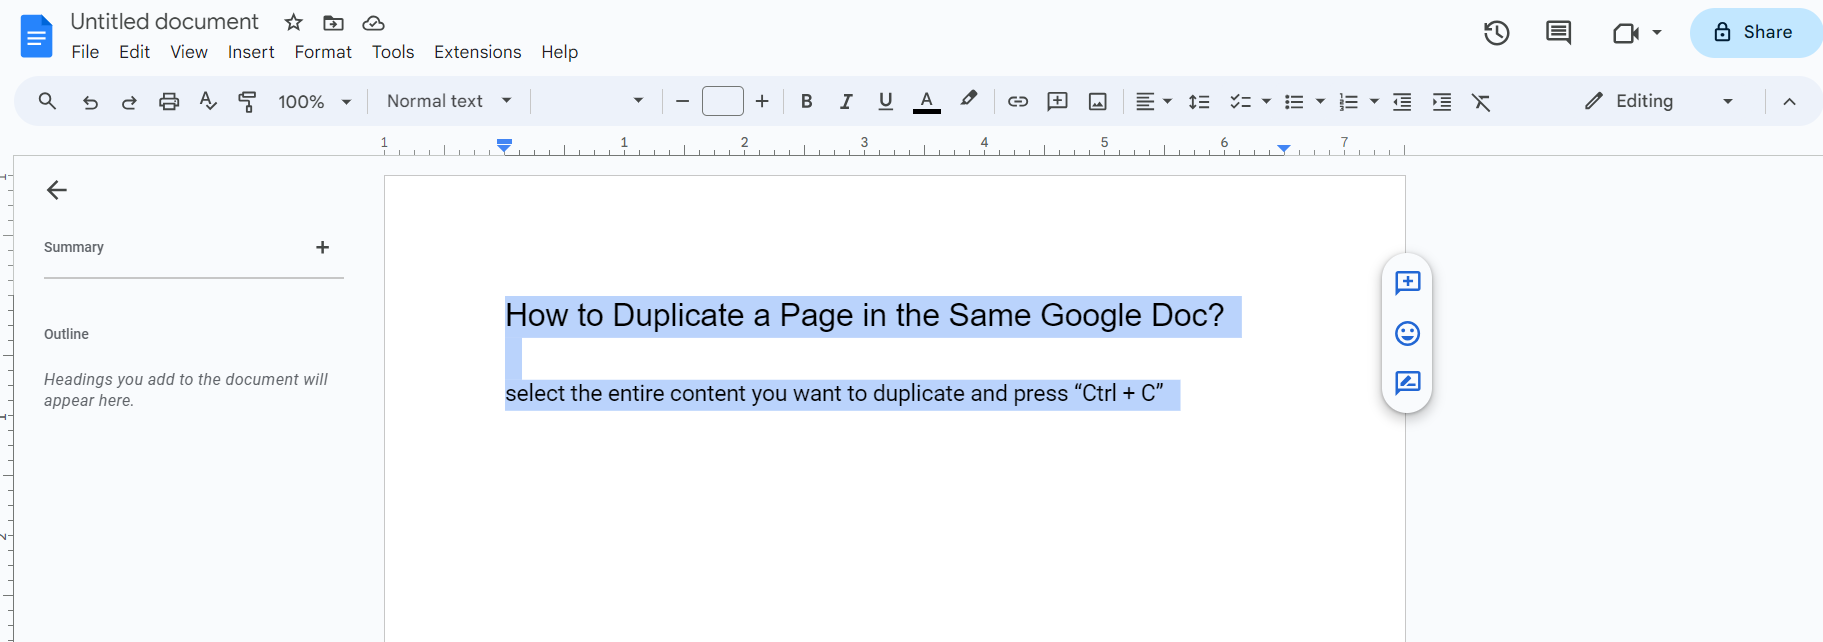 select the entire content you want to duplicate